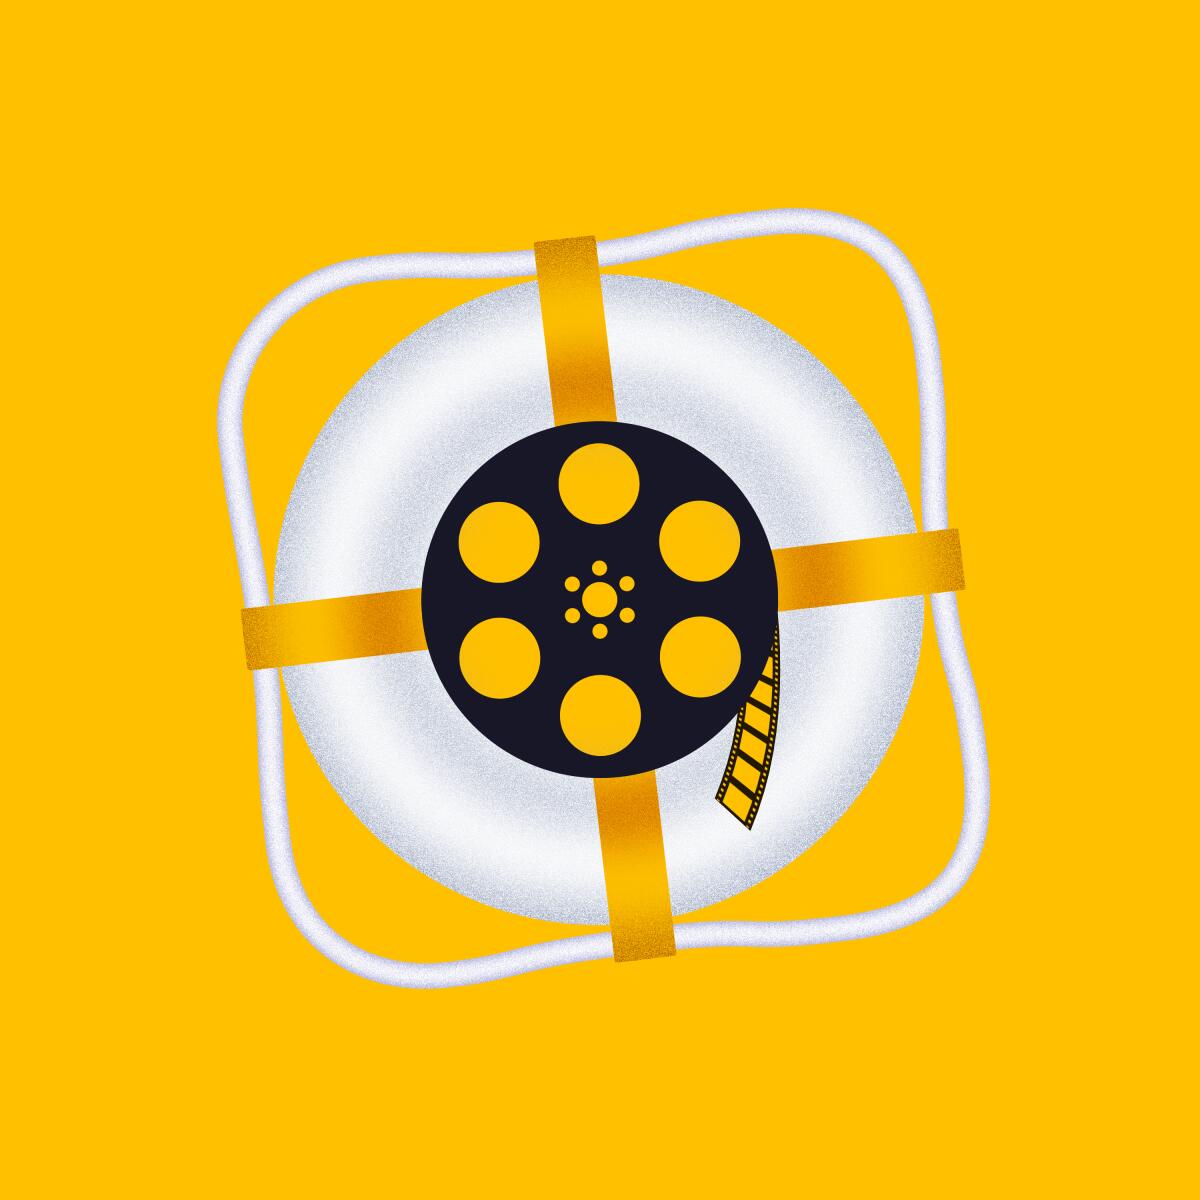 Illustration of a film reel in the center of a life preserver